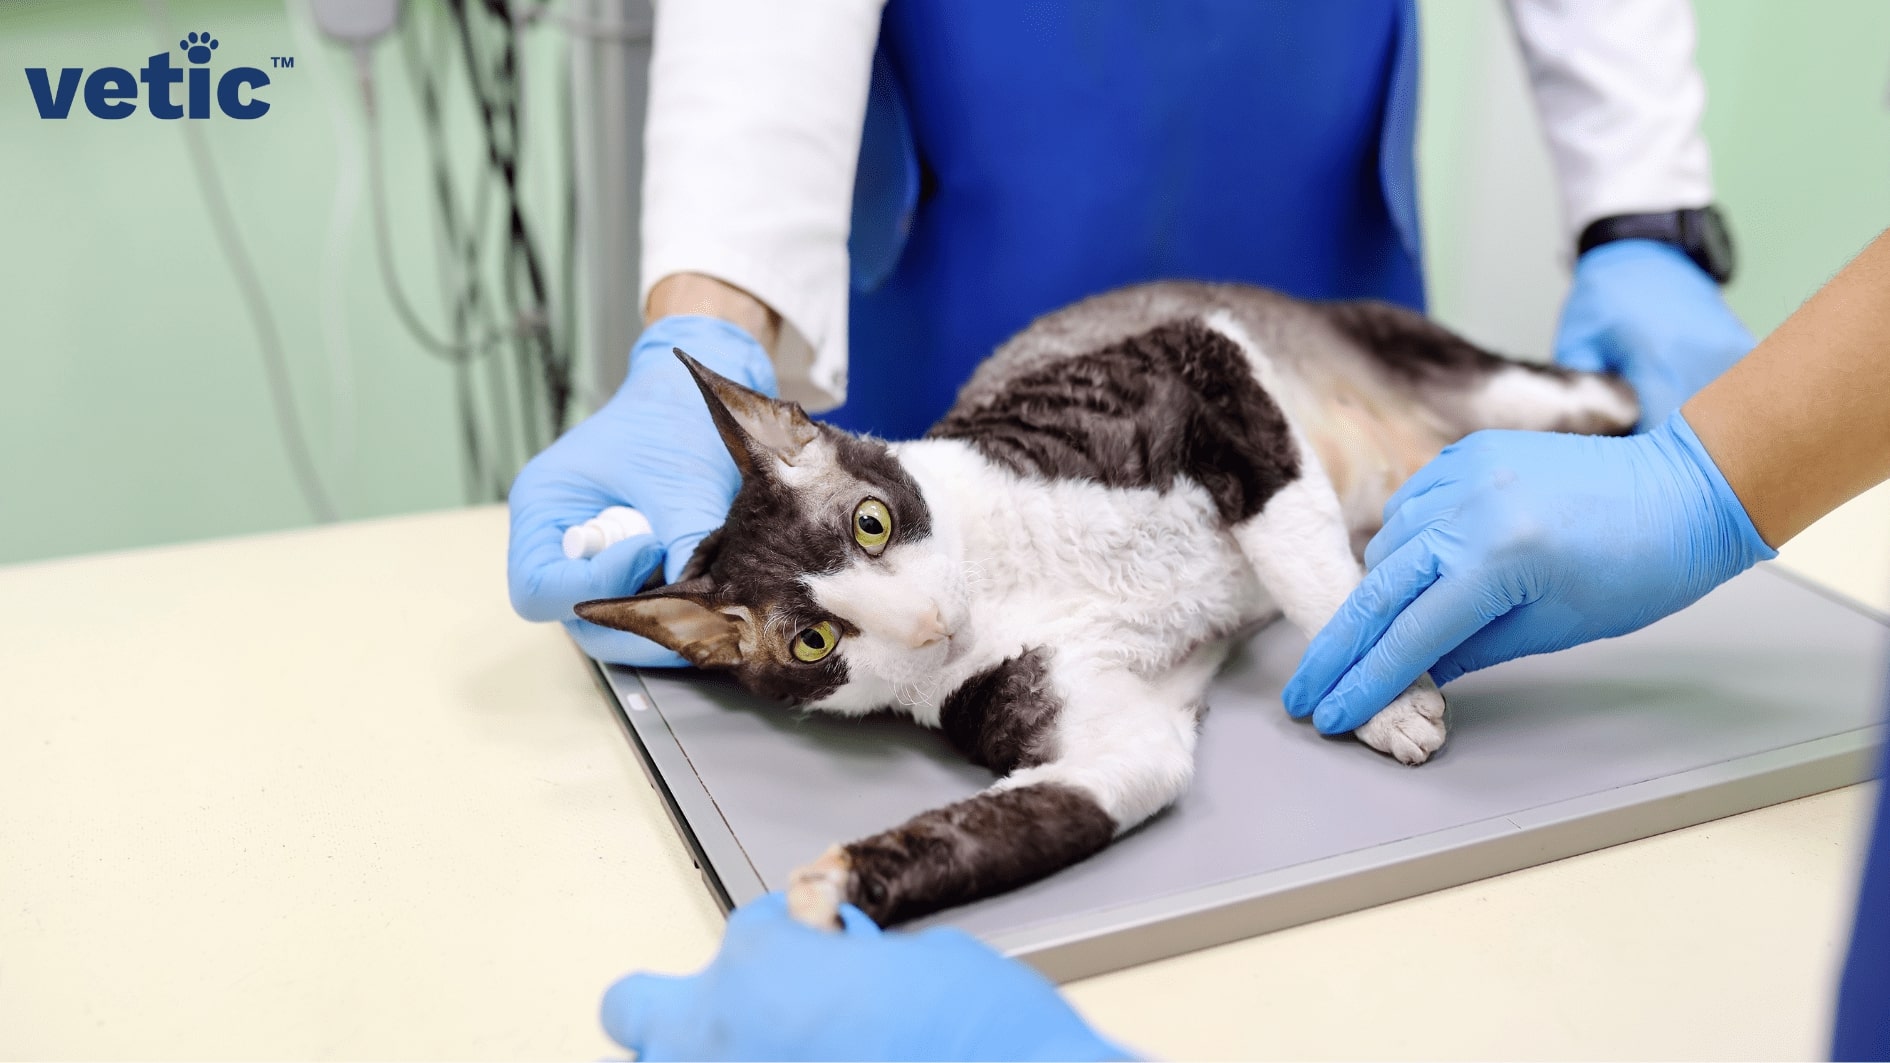 scared cat held on X-ray table by professionals wearing gloves